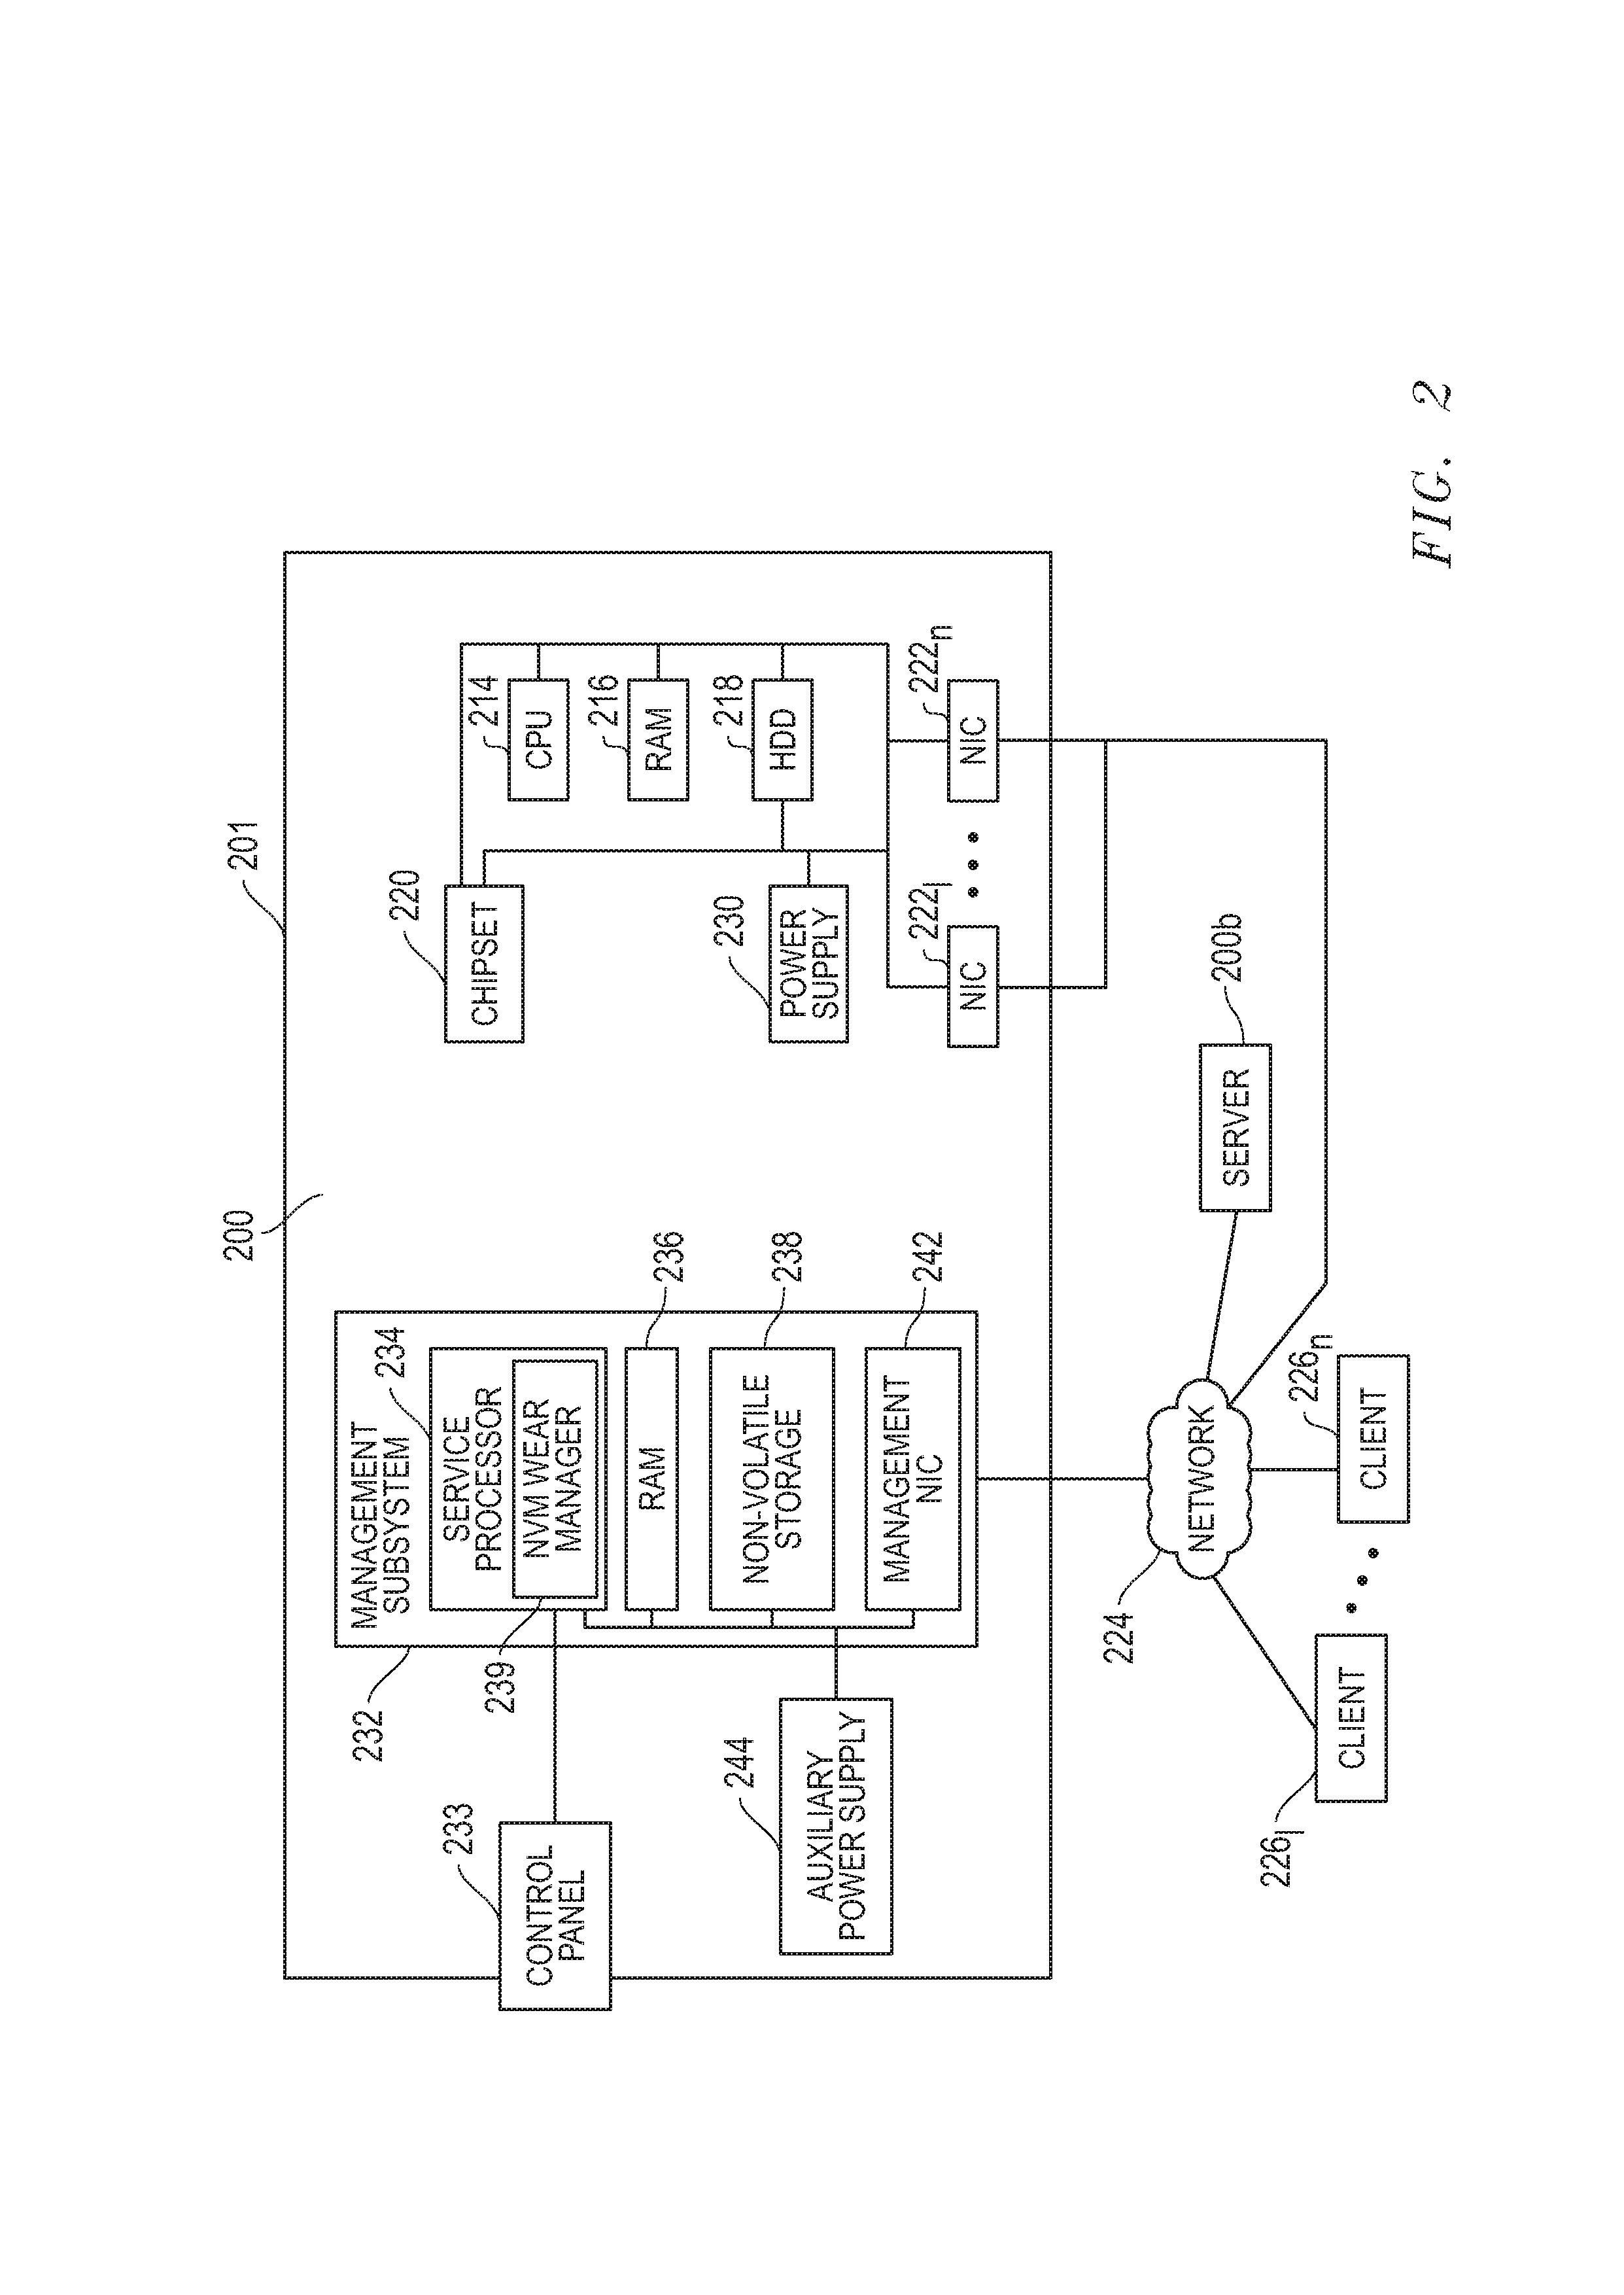 Systems and methods for tracking and managing non-volatile memory wear